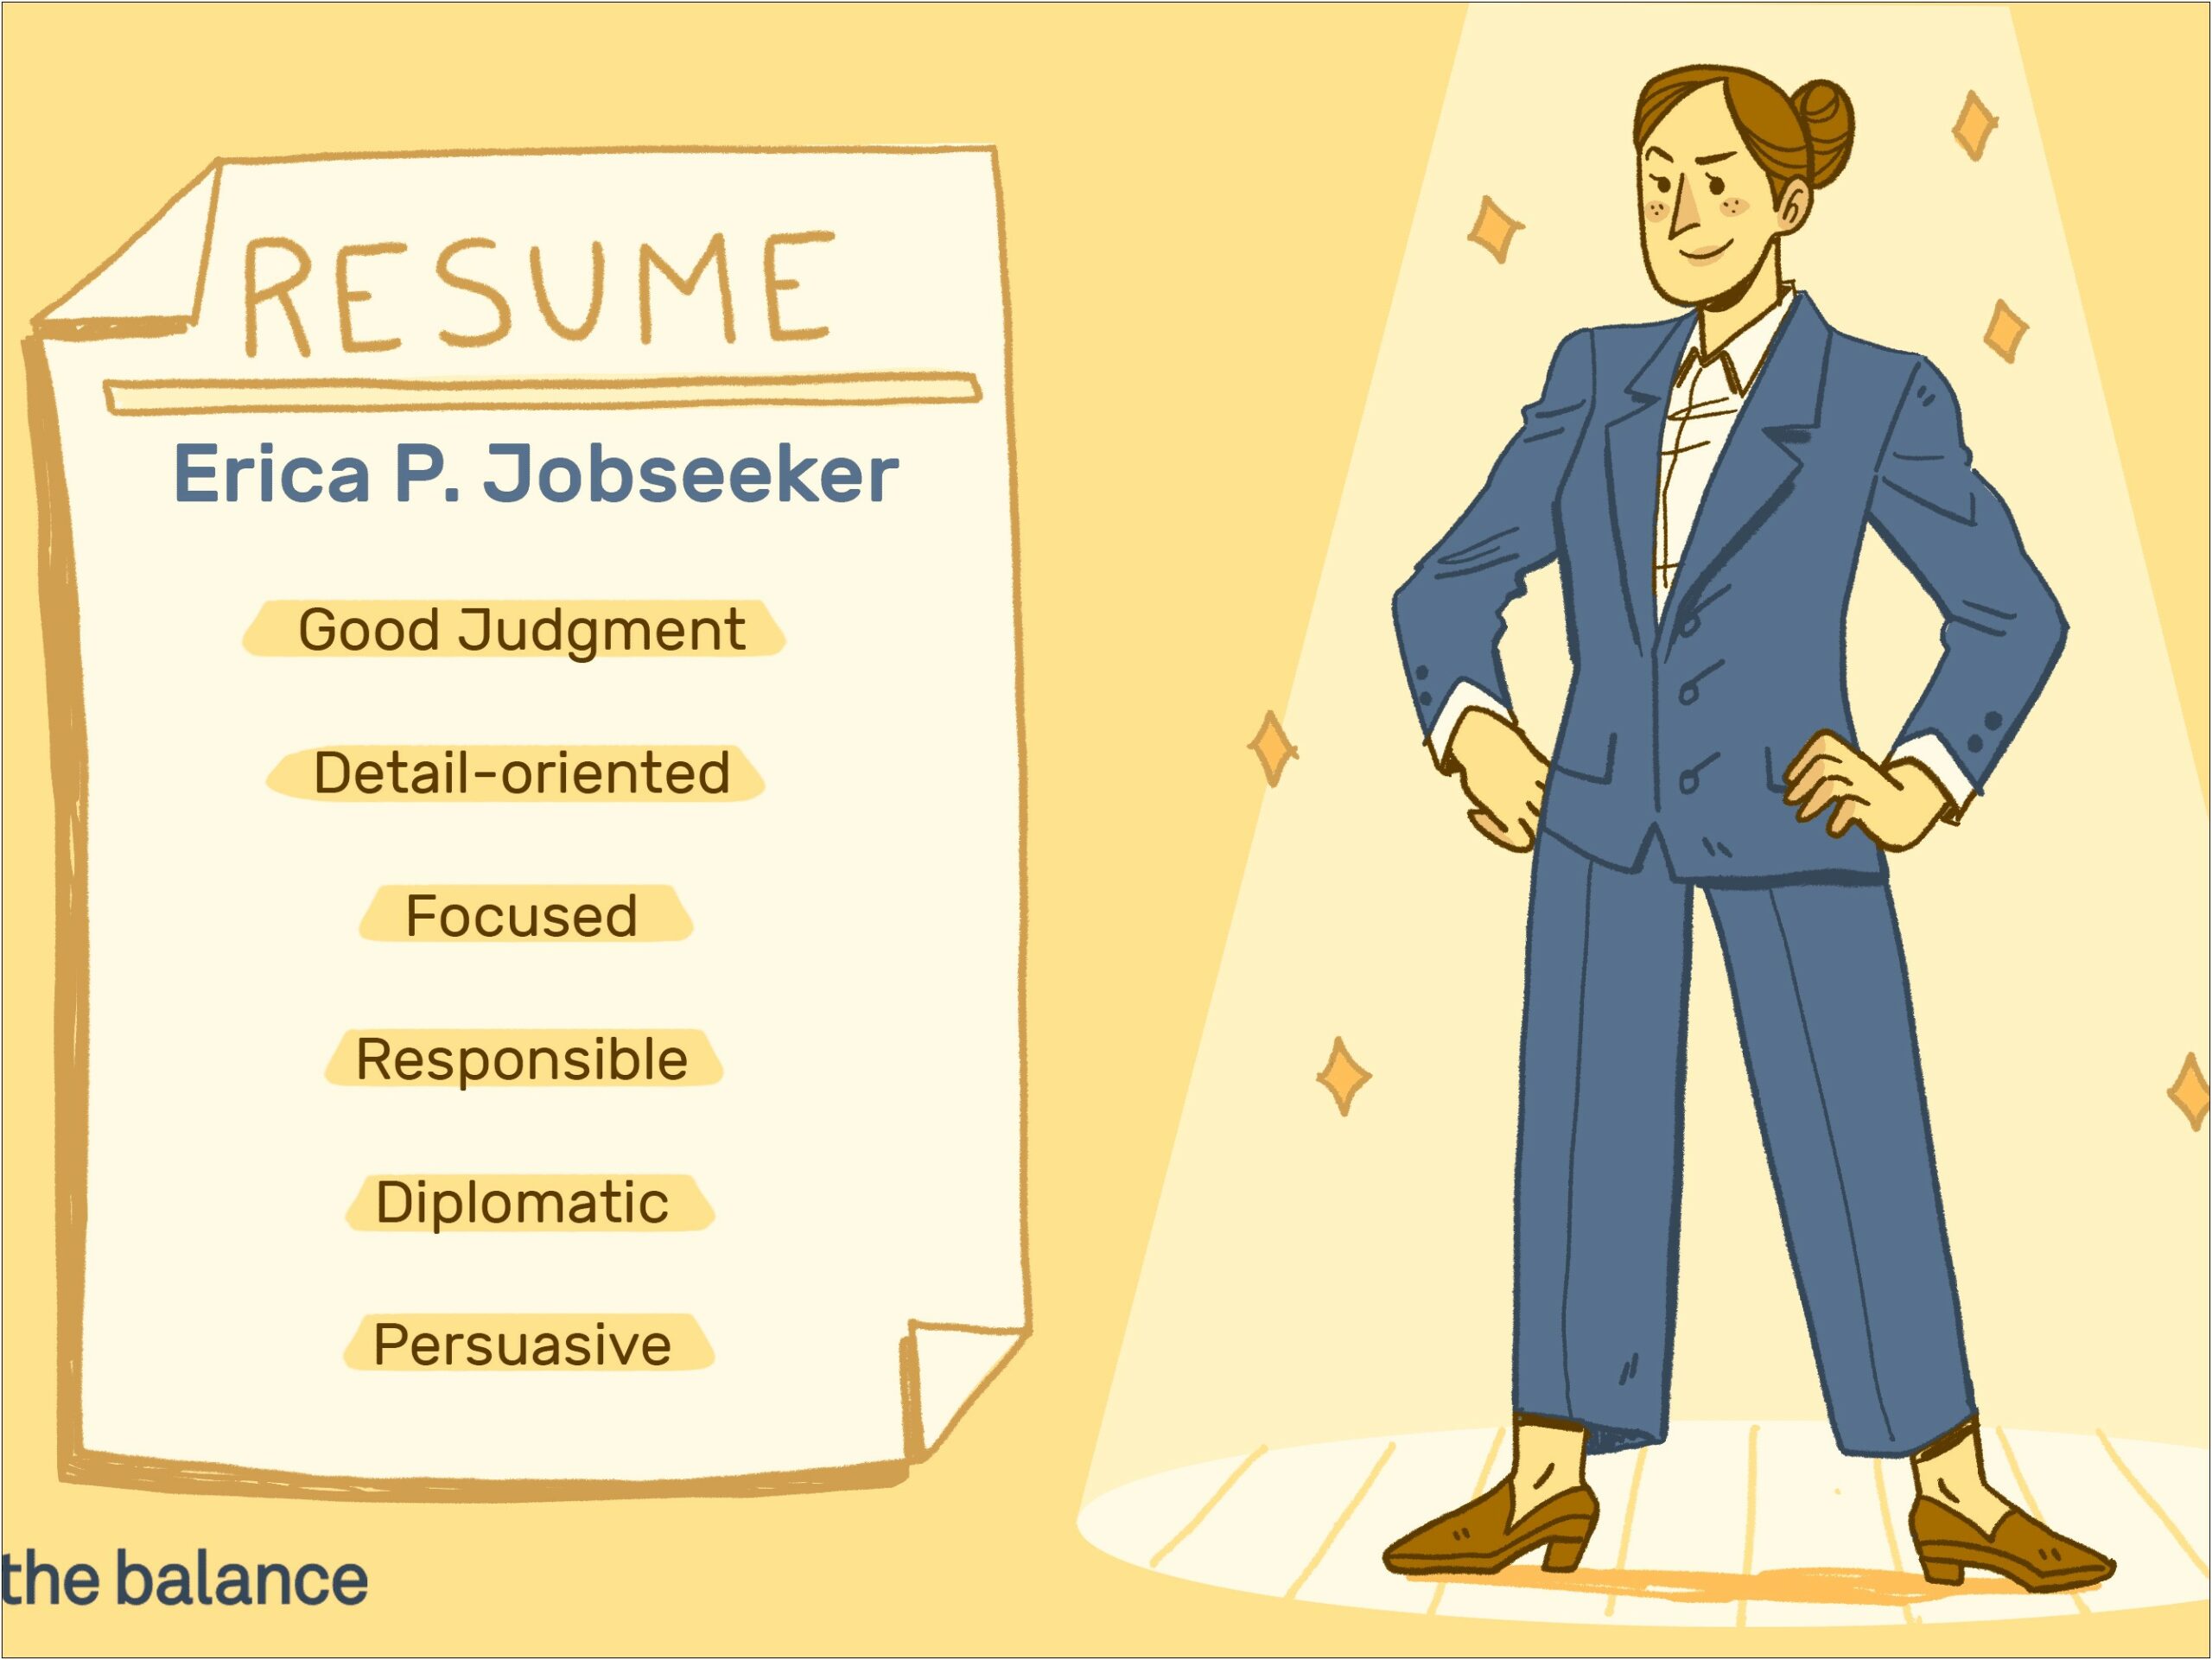 Good Personal Work Skills For Resume